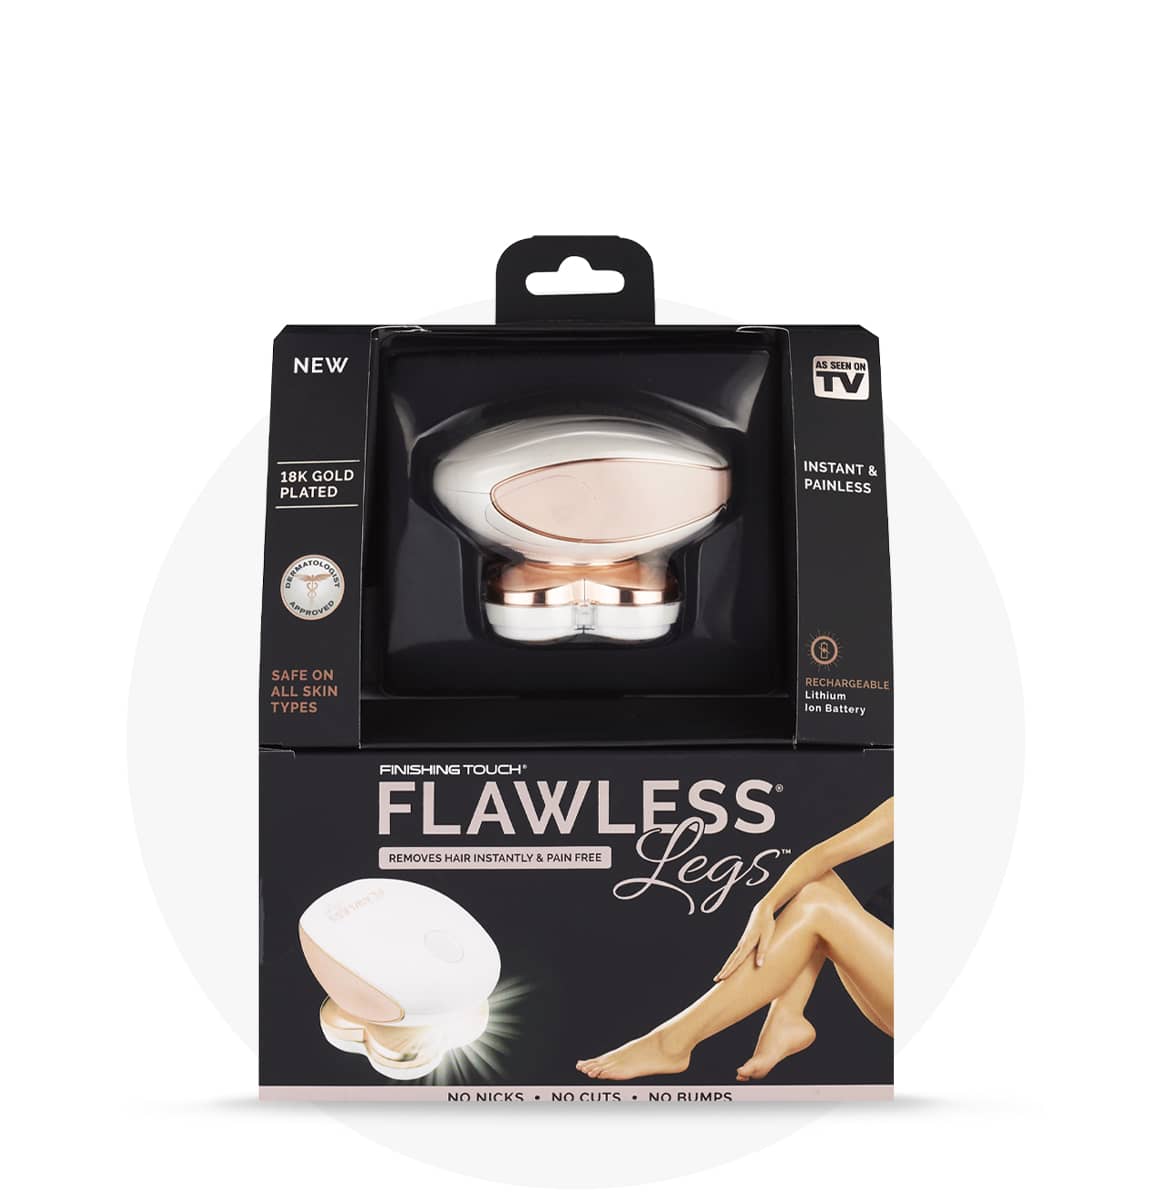 Shop for Flawless® Legs hair remover